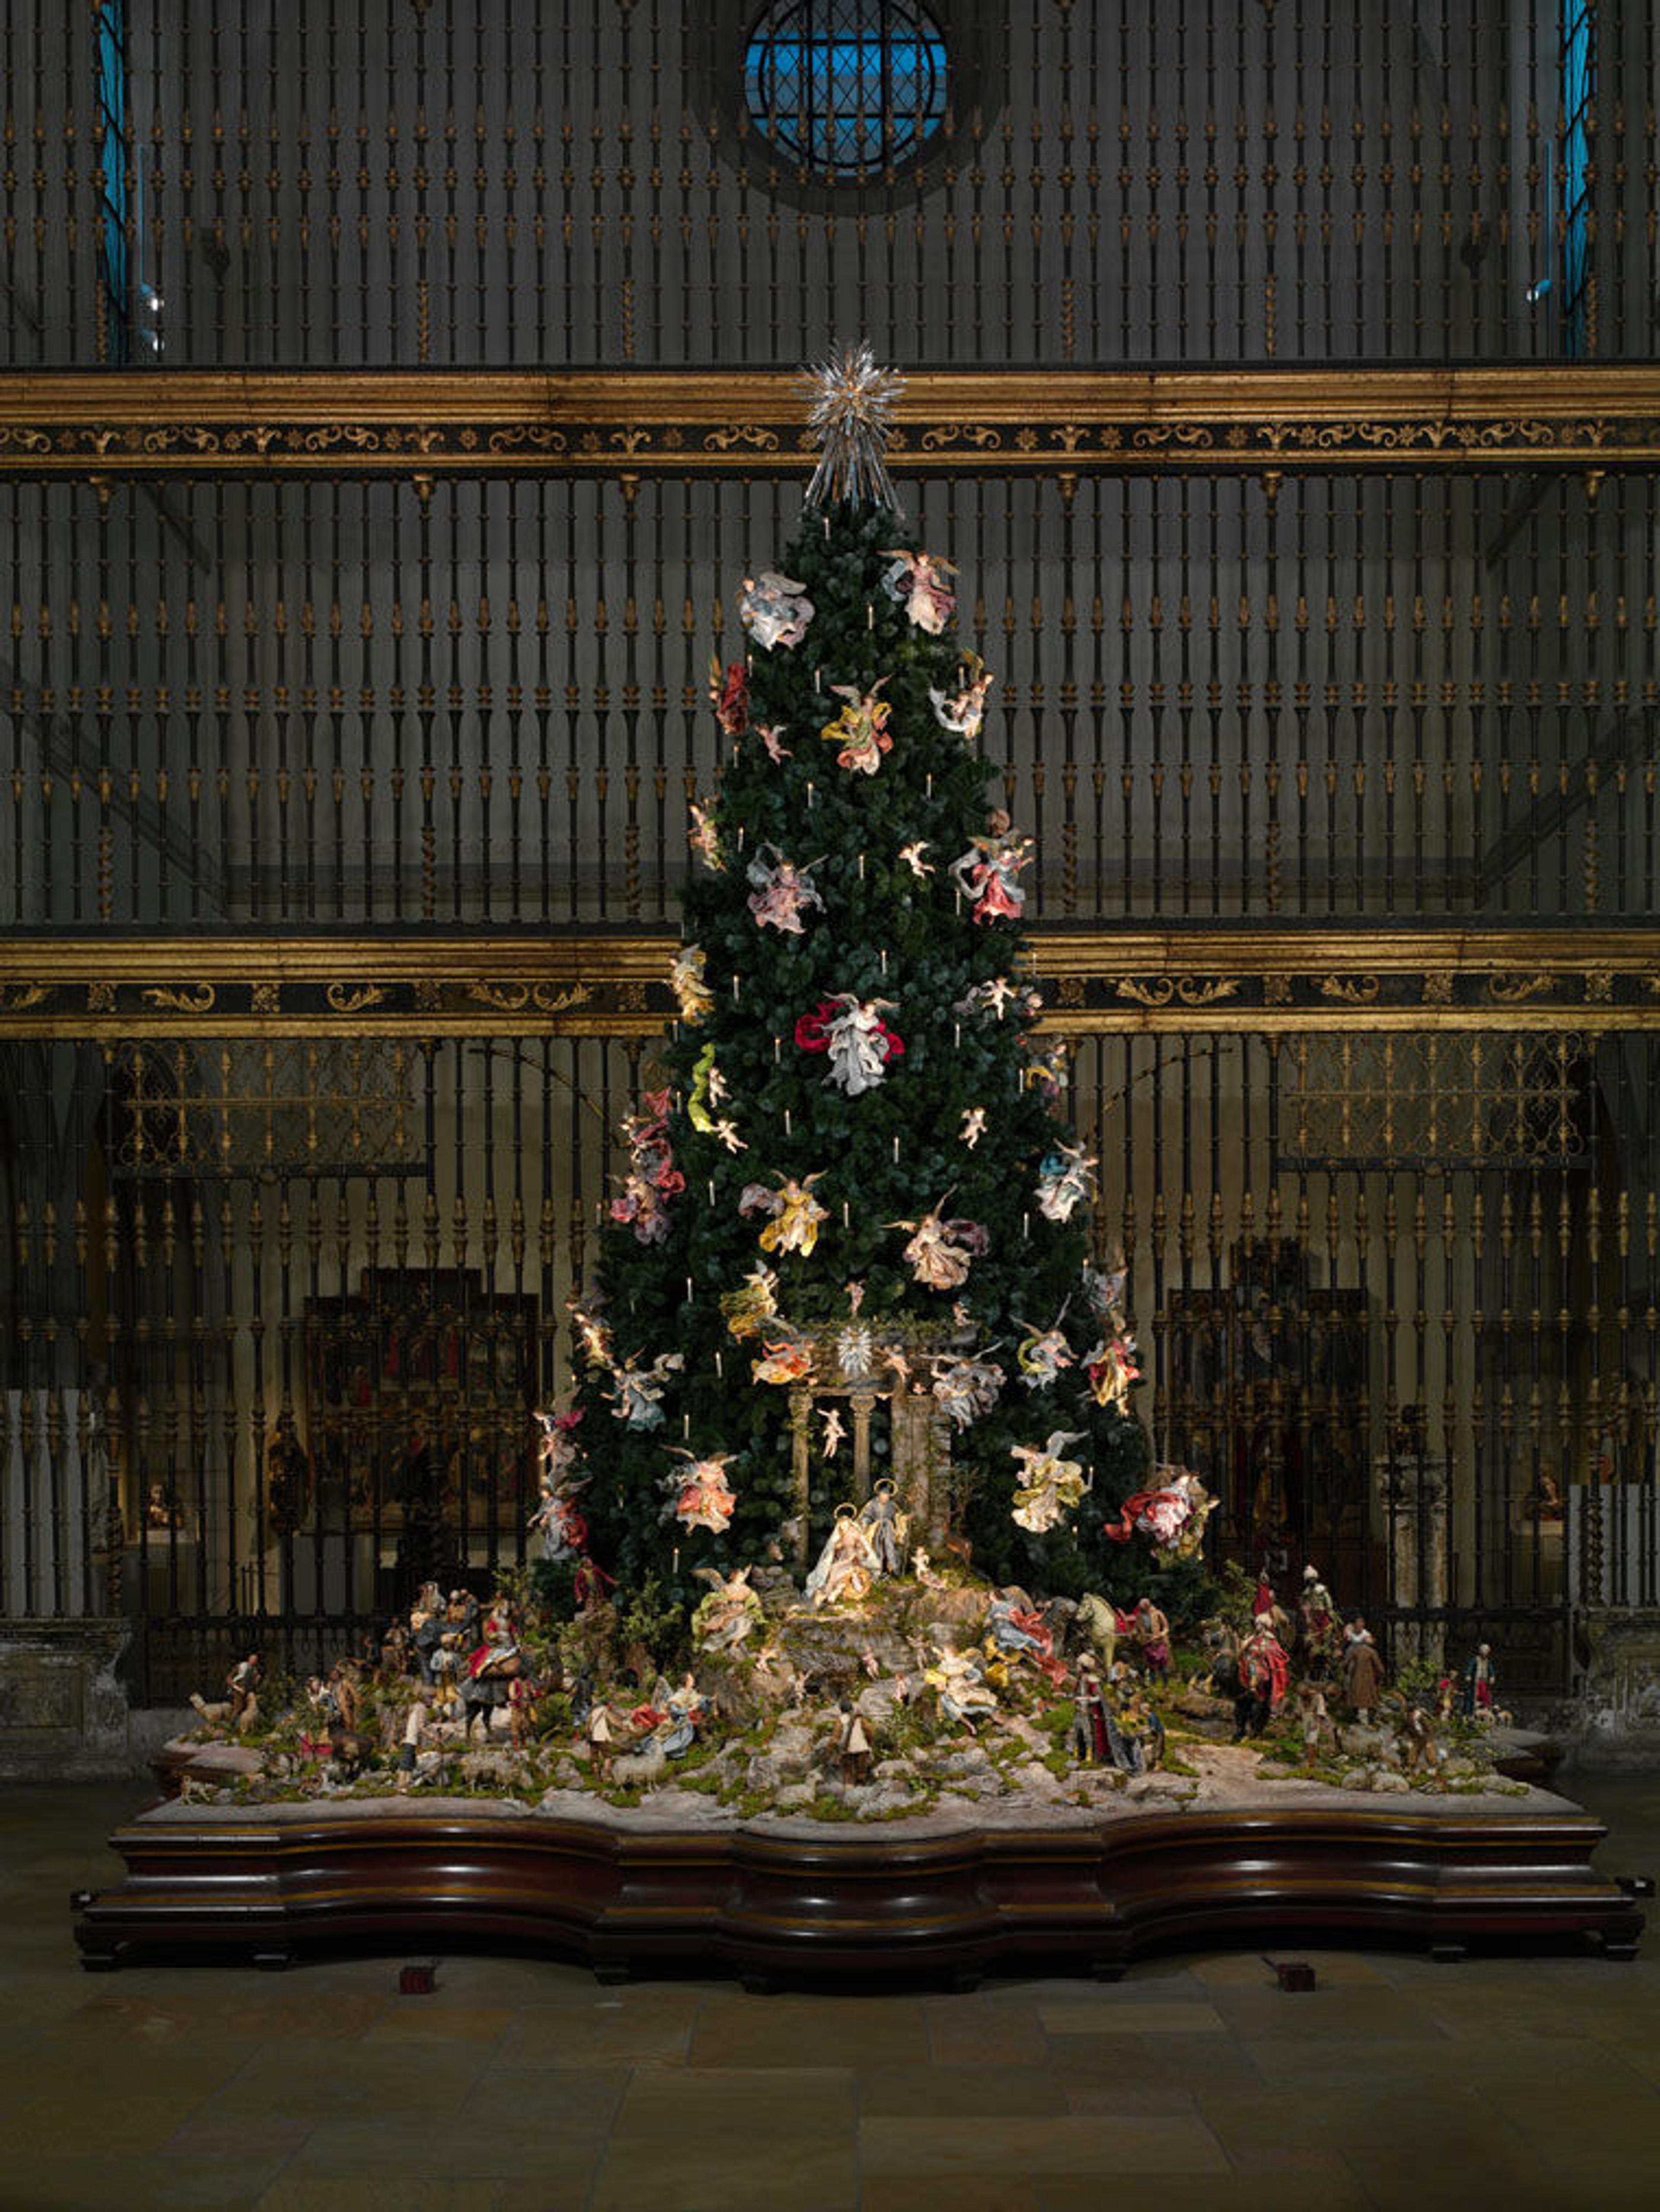 View of The Met's Christmas tree and Neapolitan creche installed in a medieval sculpture gallery